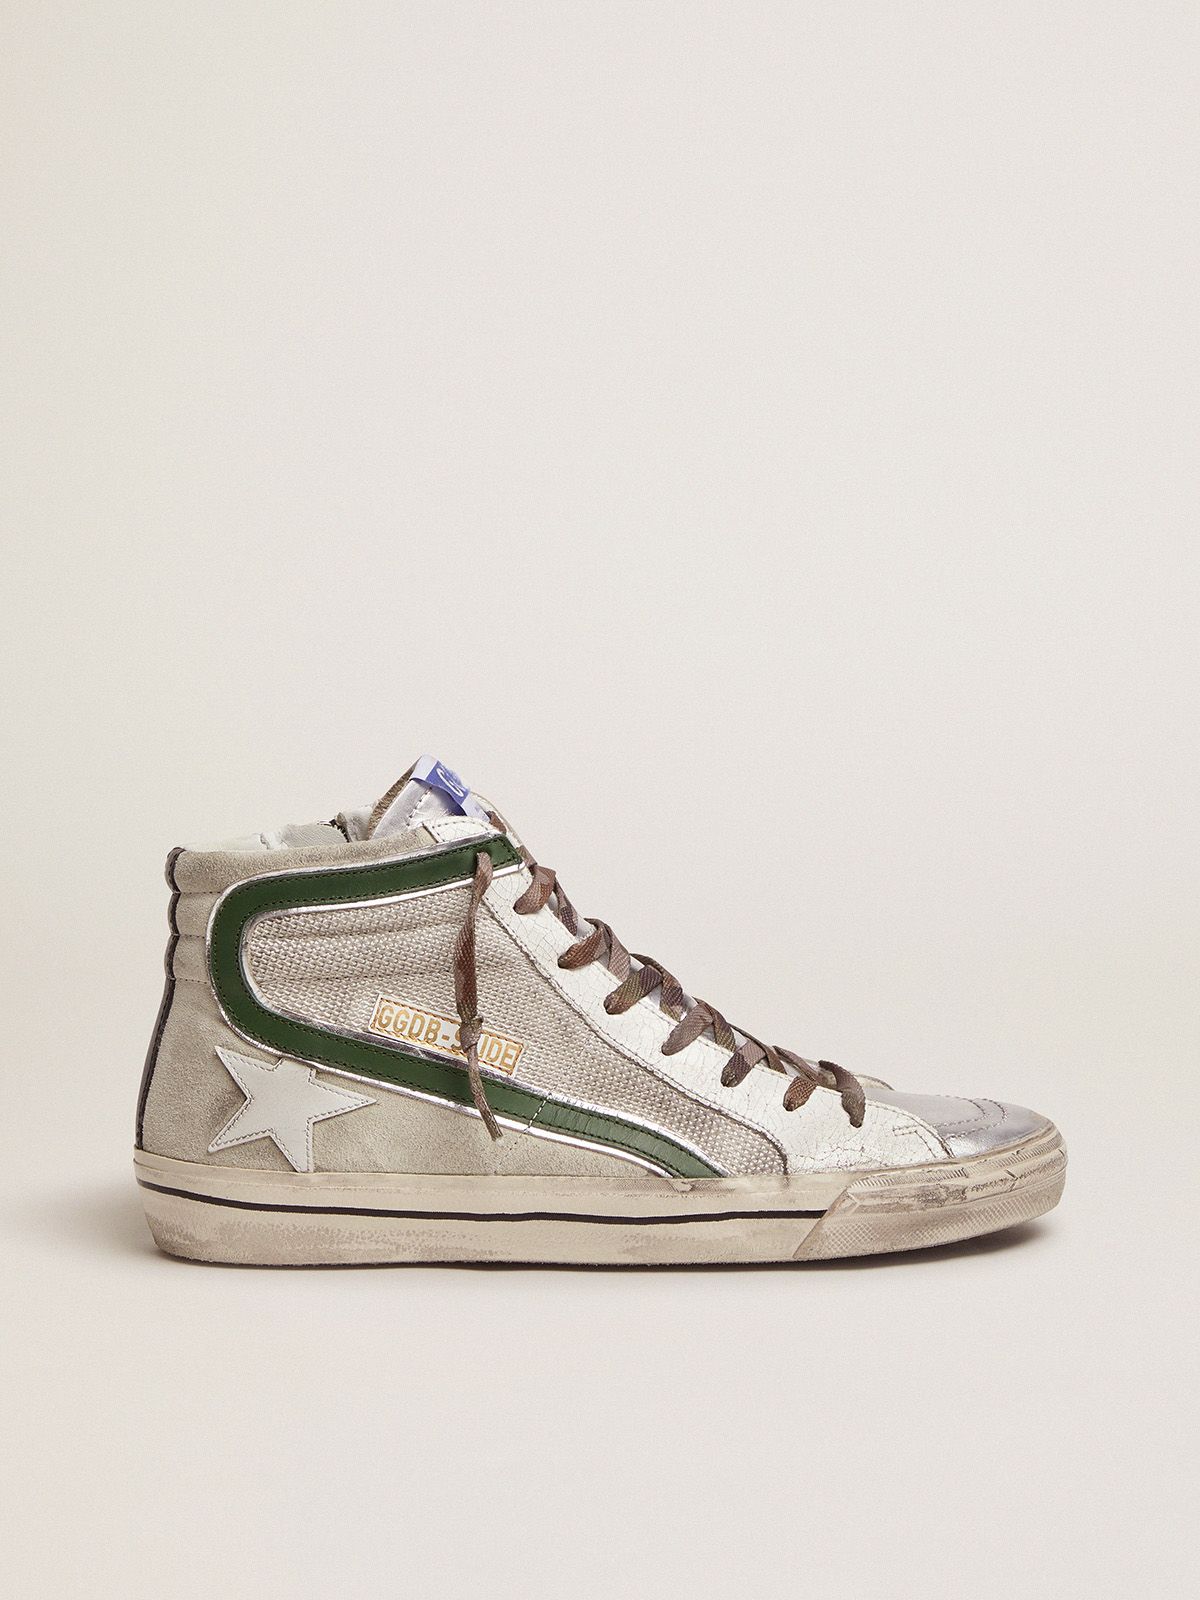 golden goose flash leather Slide green sneakers LTD in and with mesh